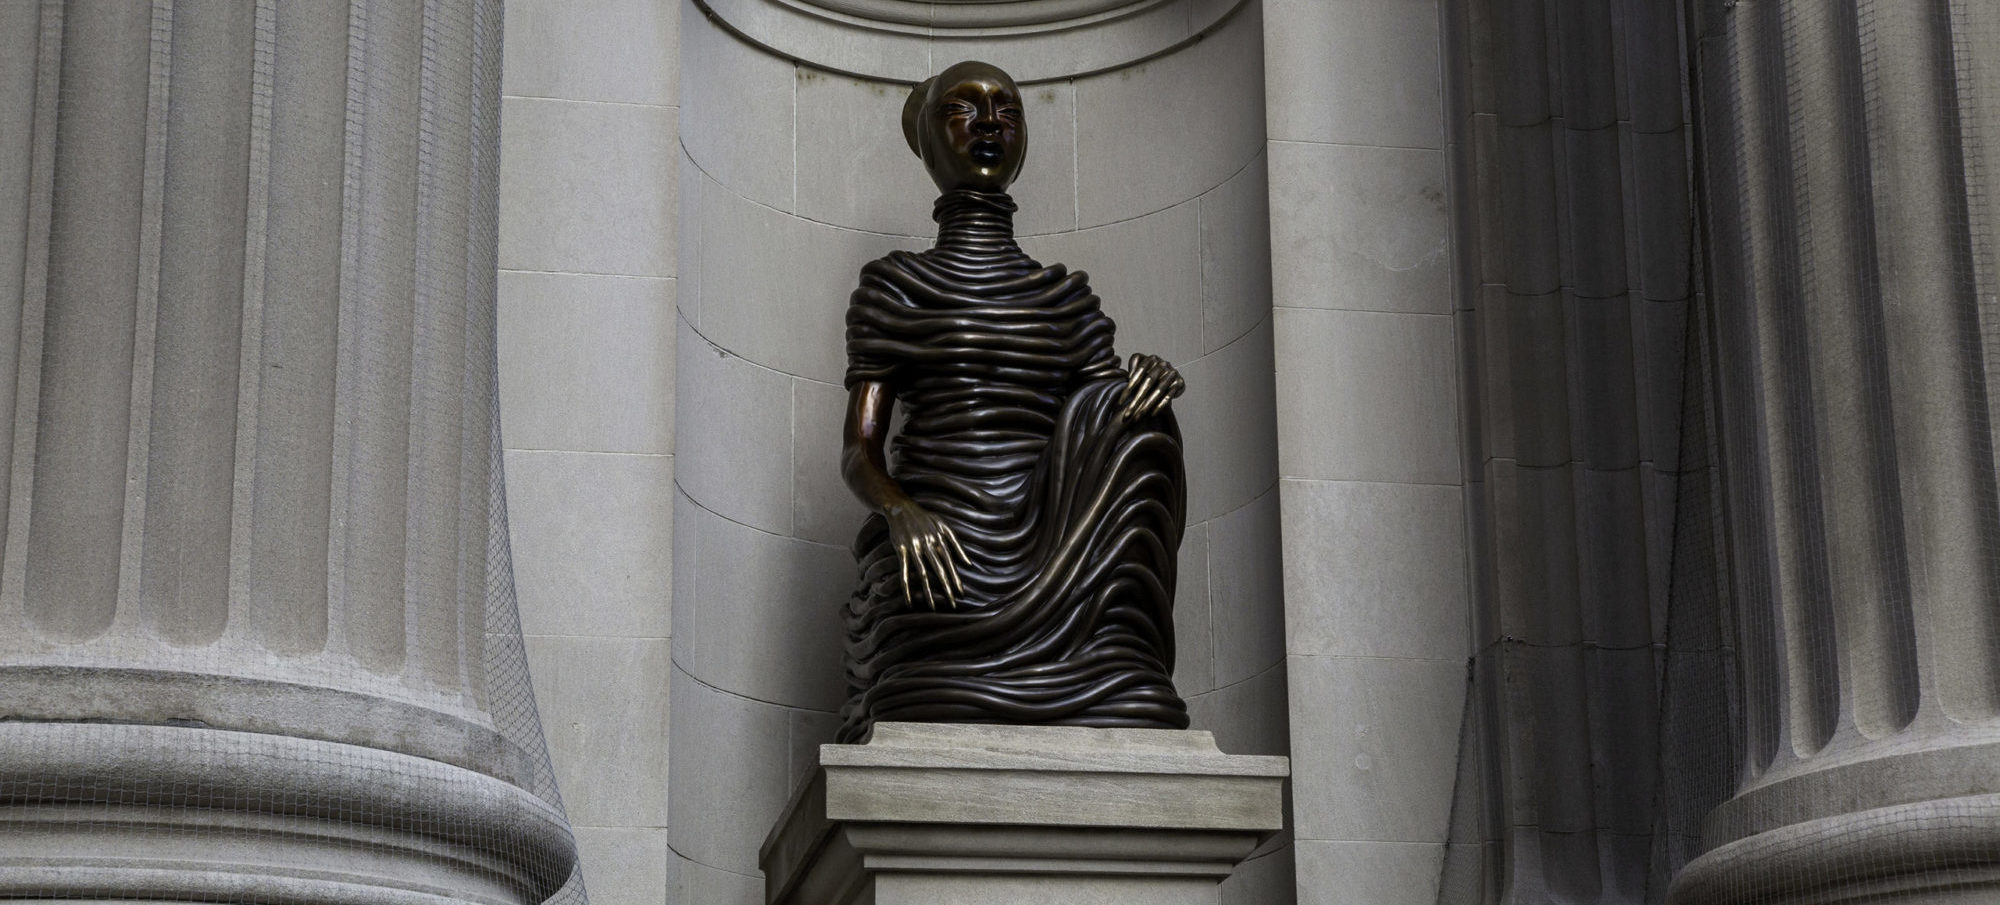 Front facing image of a sculpture: a figure kneeling with one arm in lap and another raised. The figure has rings wrapped around it. It sits in between large columns and looks straight ahead.